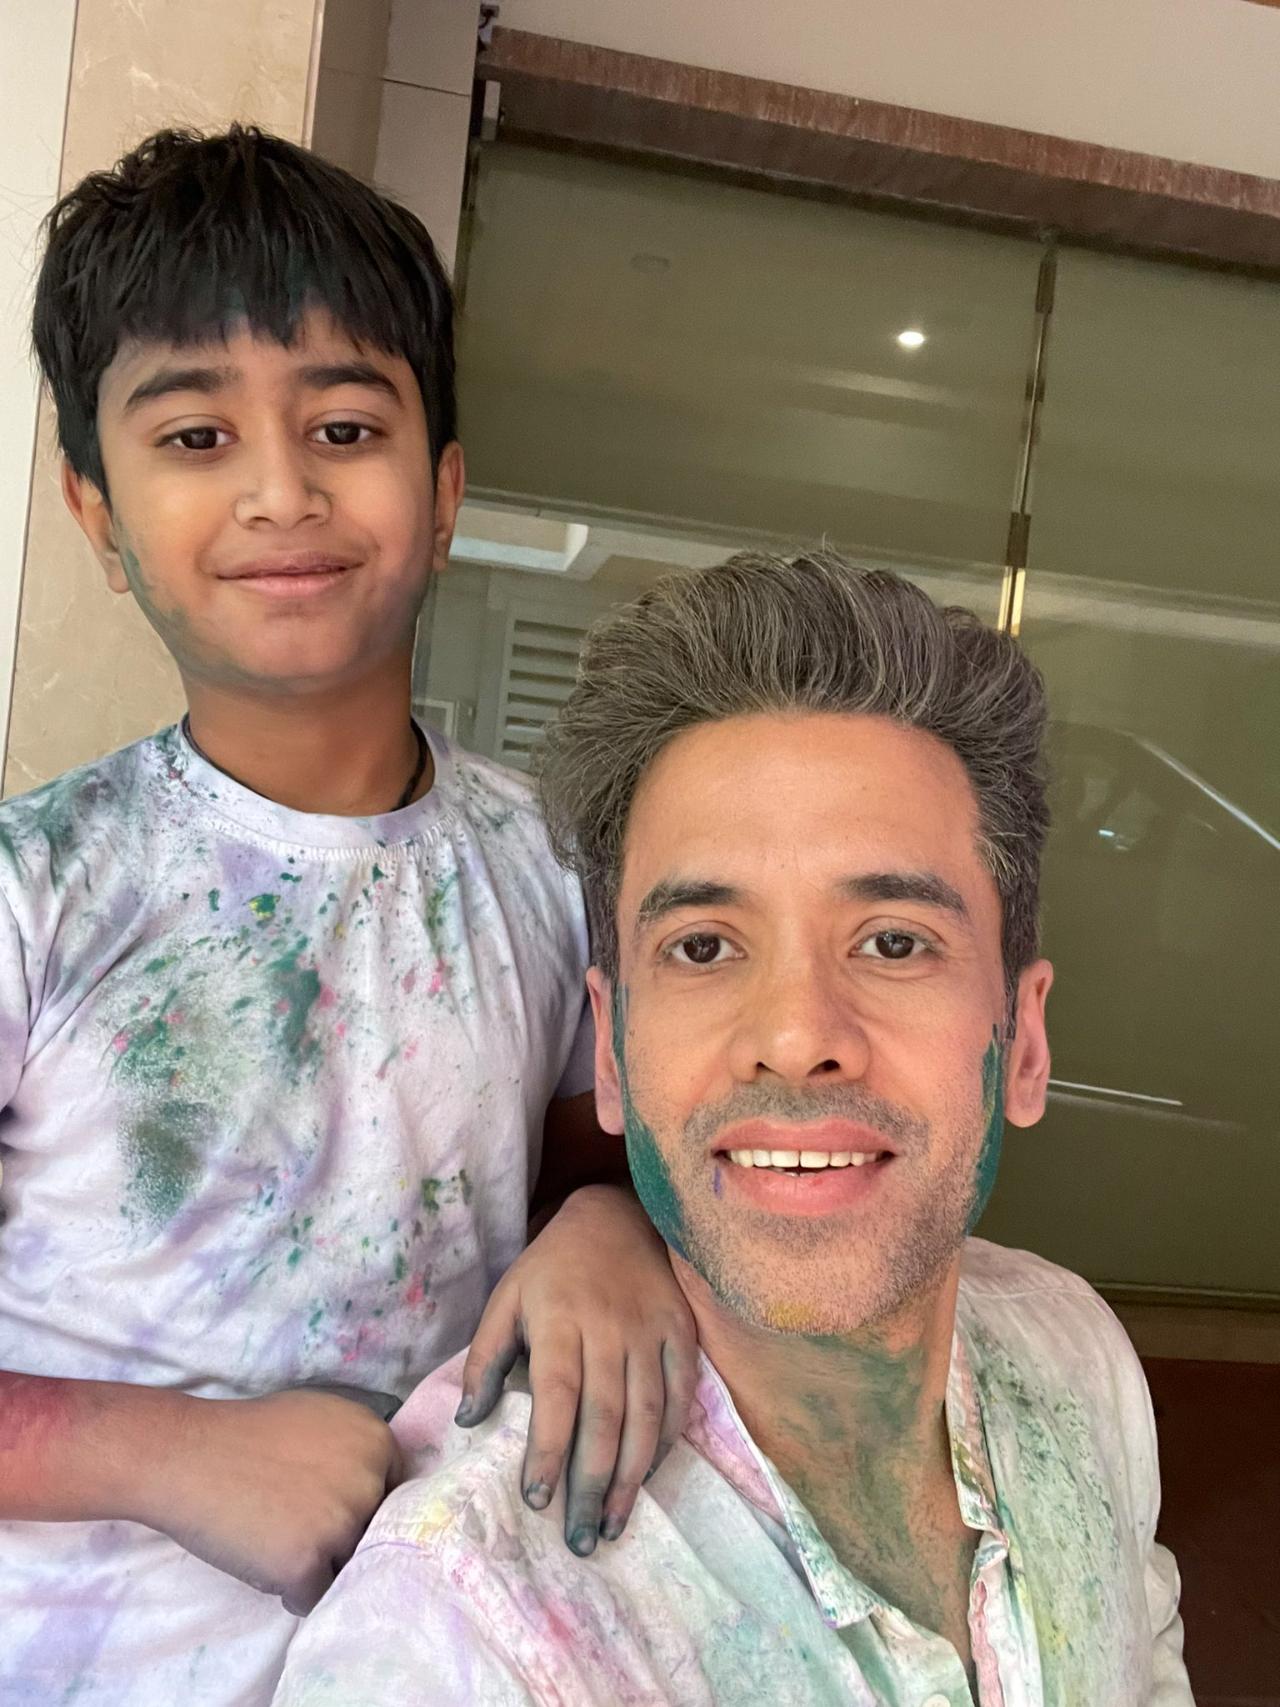 Tusshar Kapoor celebrated the day with his son at his Mumbai home